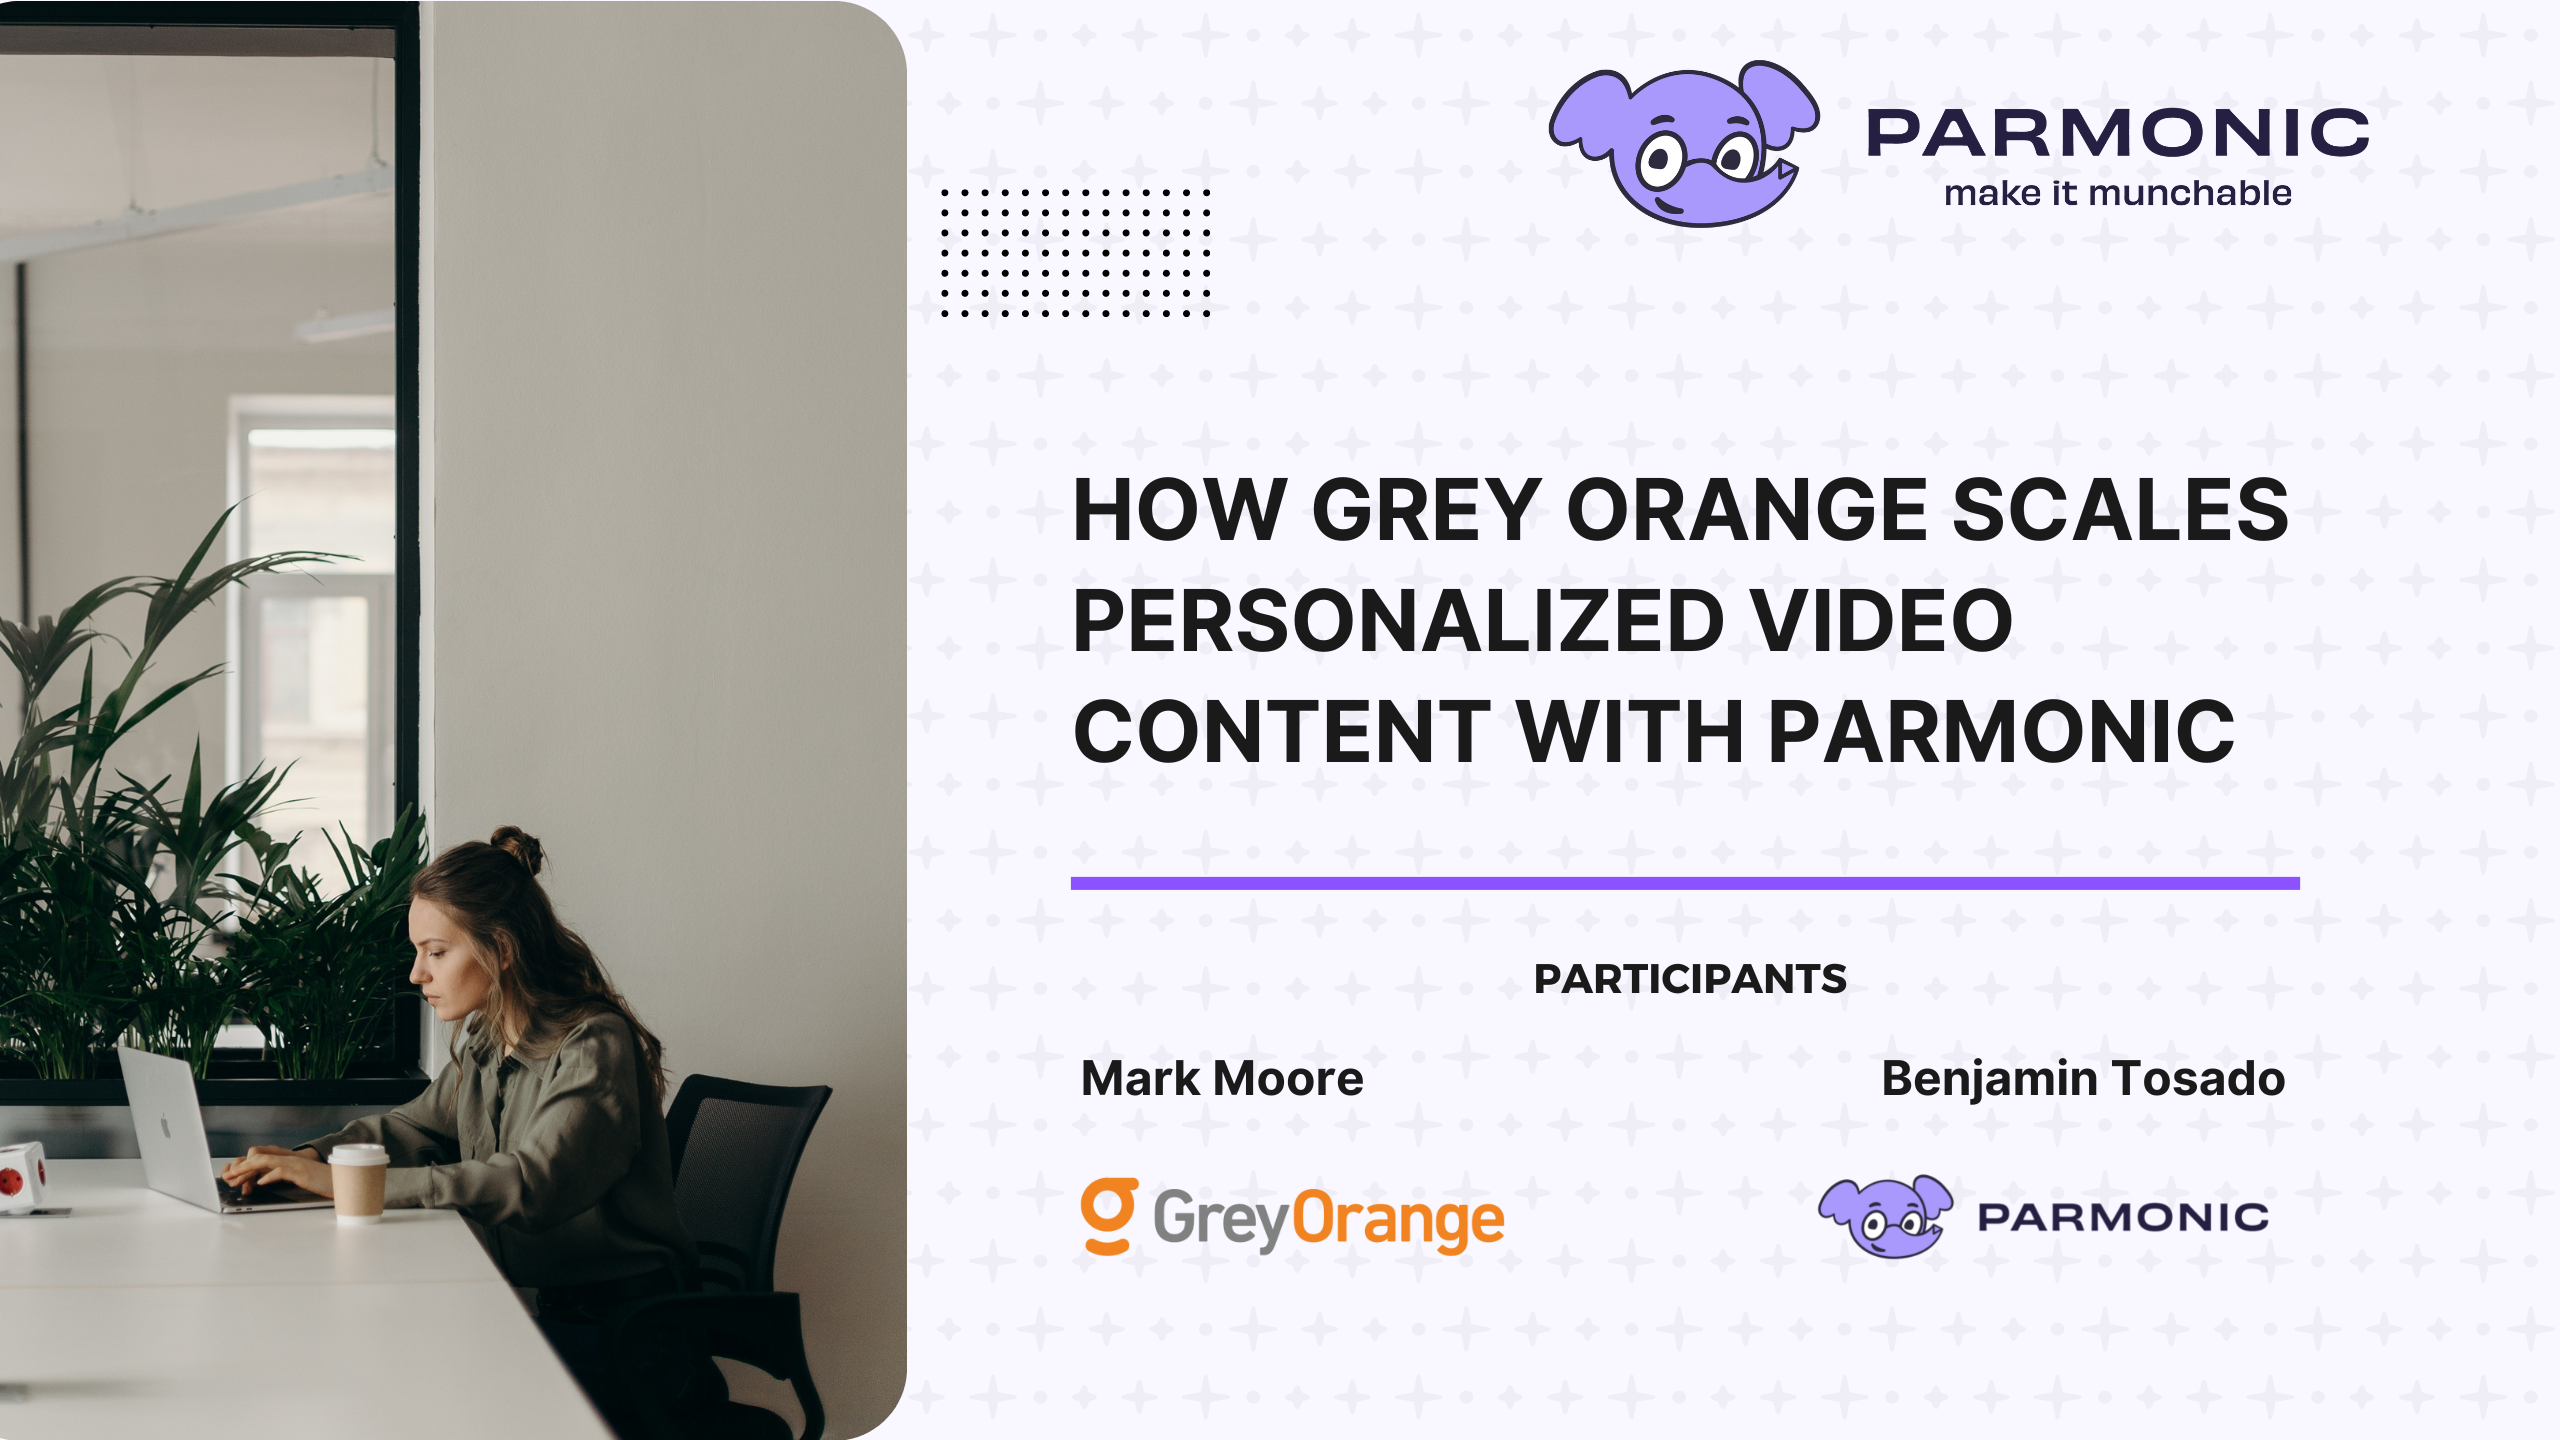 How Grey Orange Scales Personalized Video Content with Parmonic